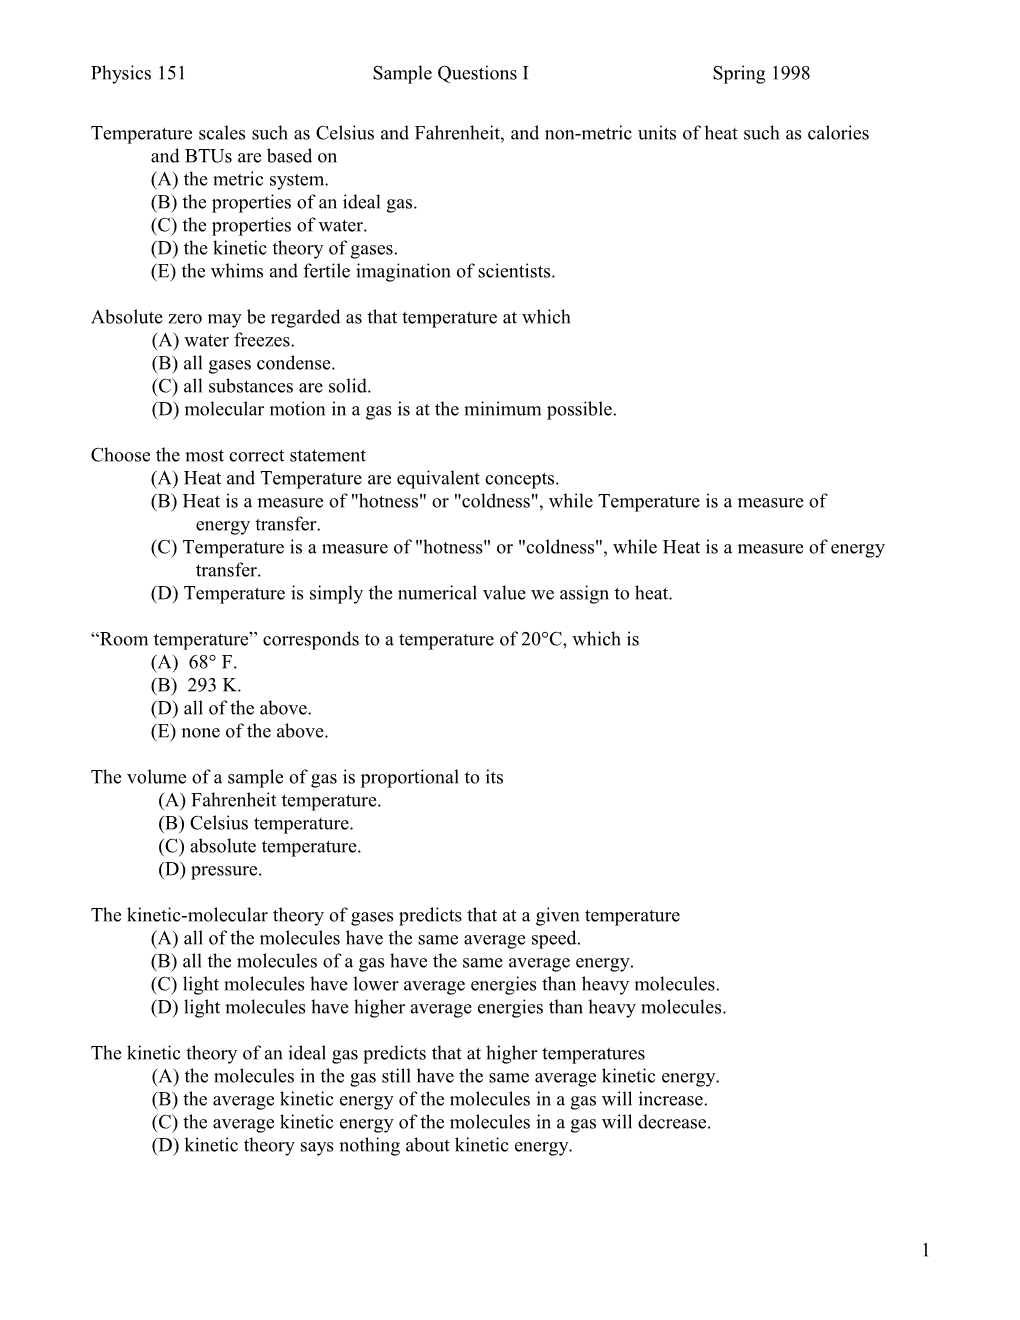 Physics 151Sample Questions Ispring 1998